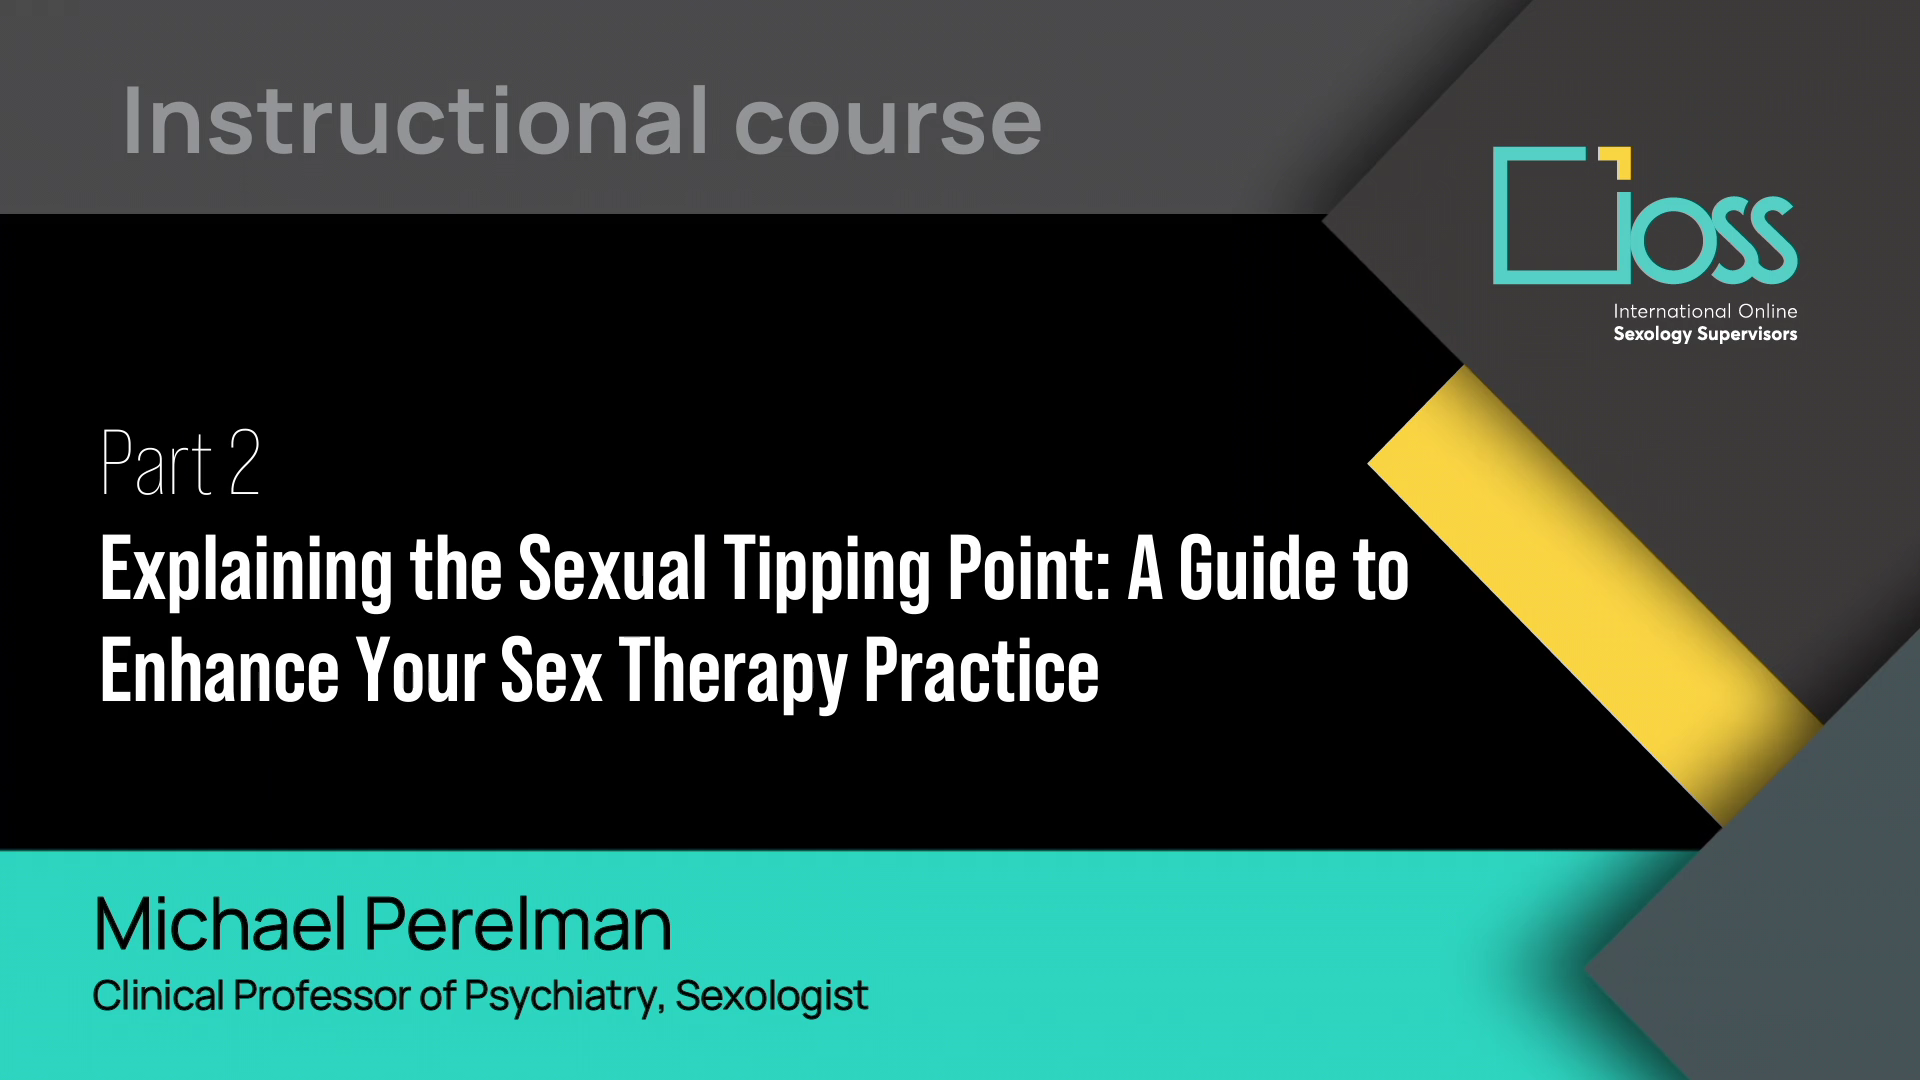 Part 2 Explaining the Sexual Tipping Point: A Guide to Enhance Your Sex Therapy Practice (Part 1 & 2)